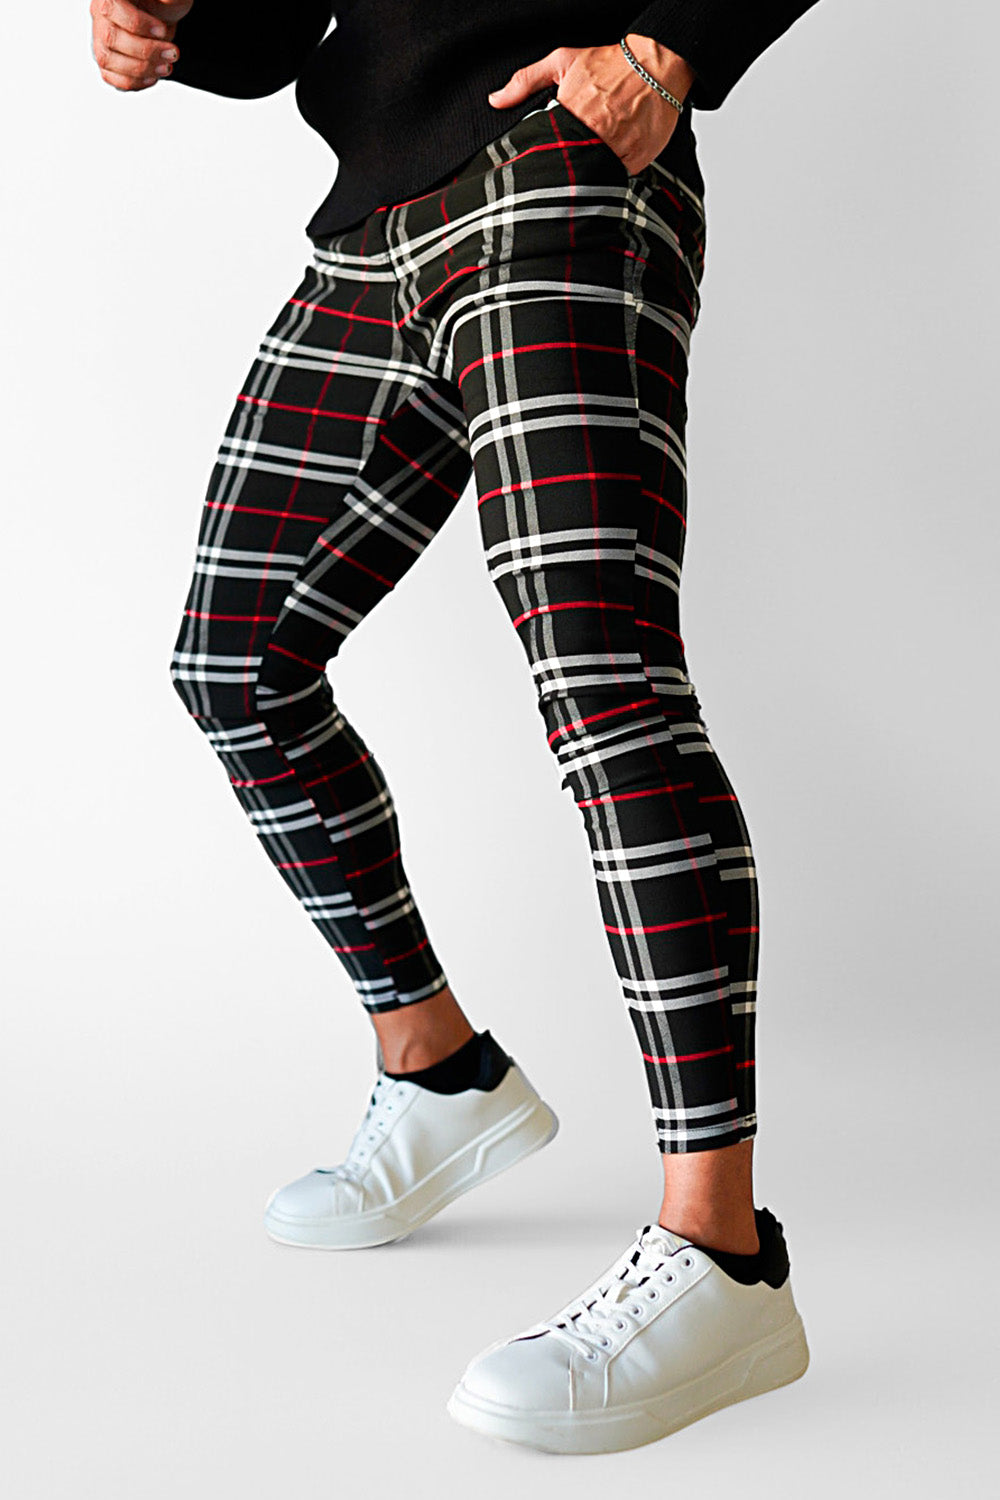 Men's Plaid Chino Pants - Black And Red